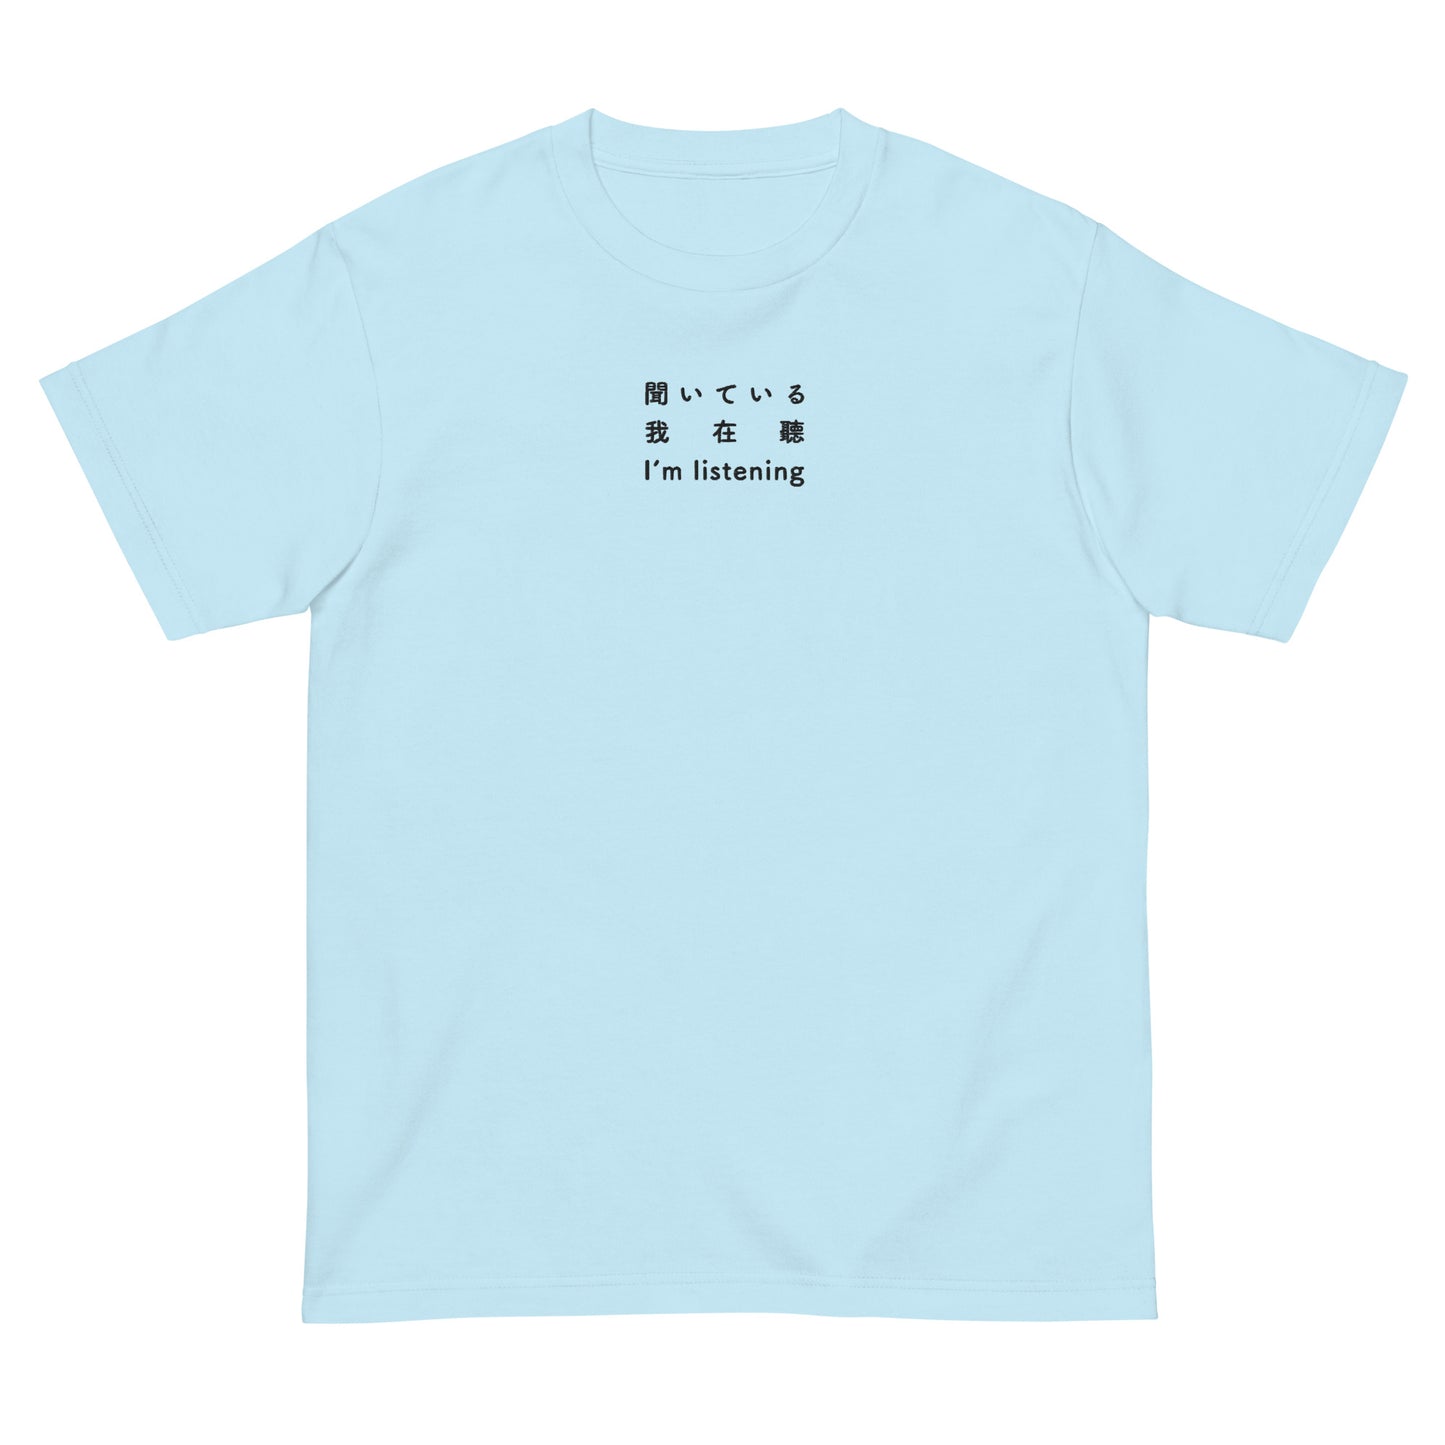 Light Blue High Quality Tee - Front Design with an Black Embroidery "I'm listening" in Japanese,Chinese and English